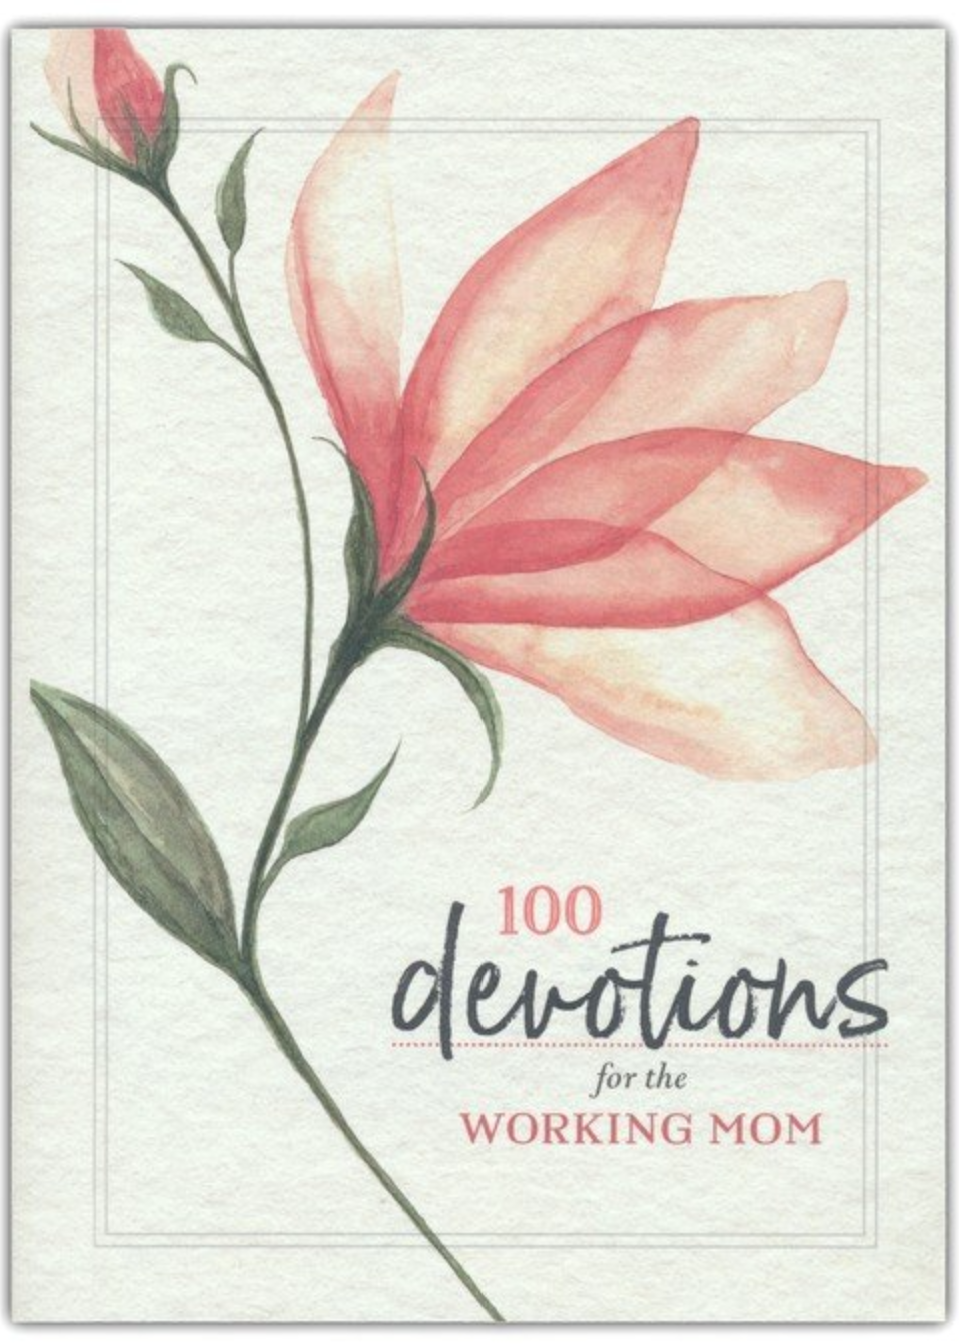 100 Devotions for Working Moms Book